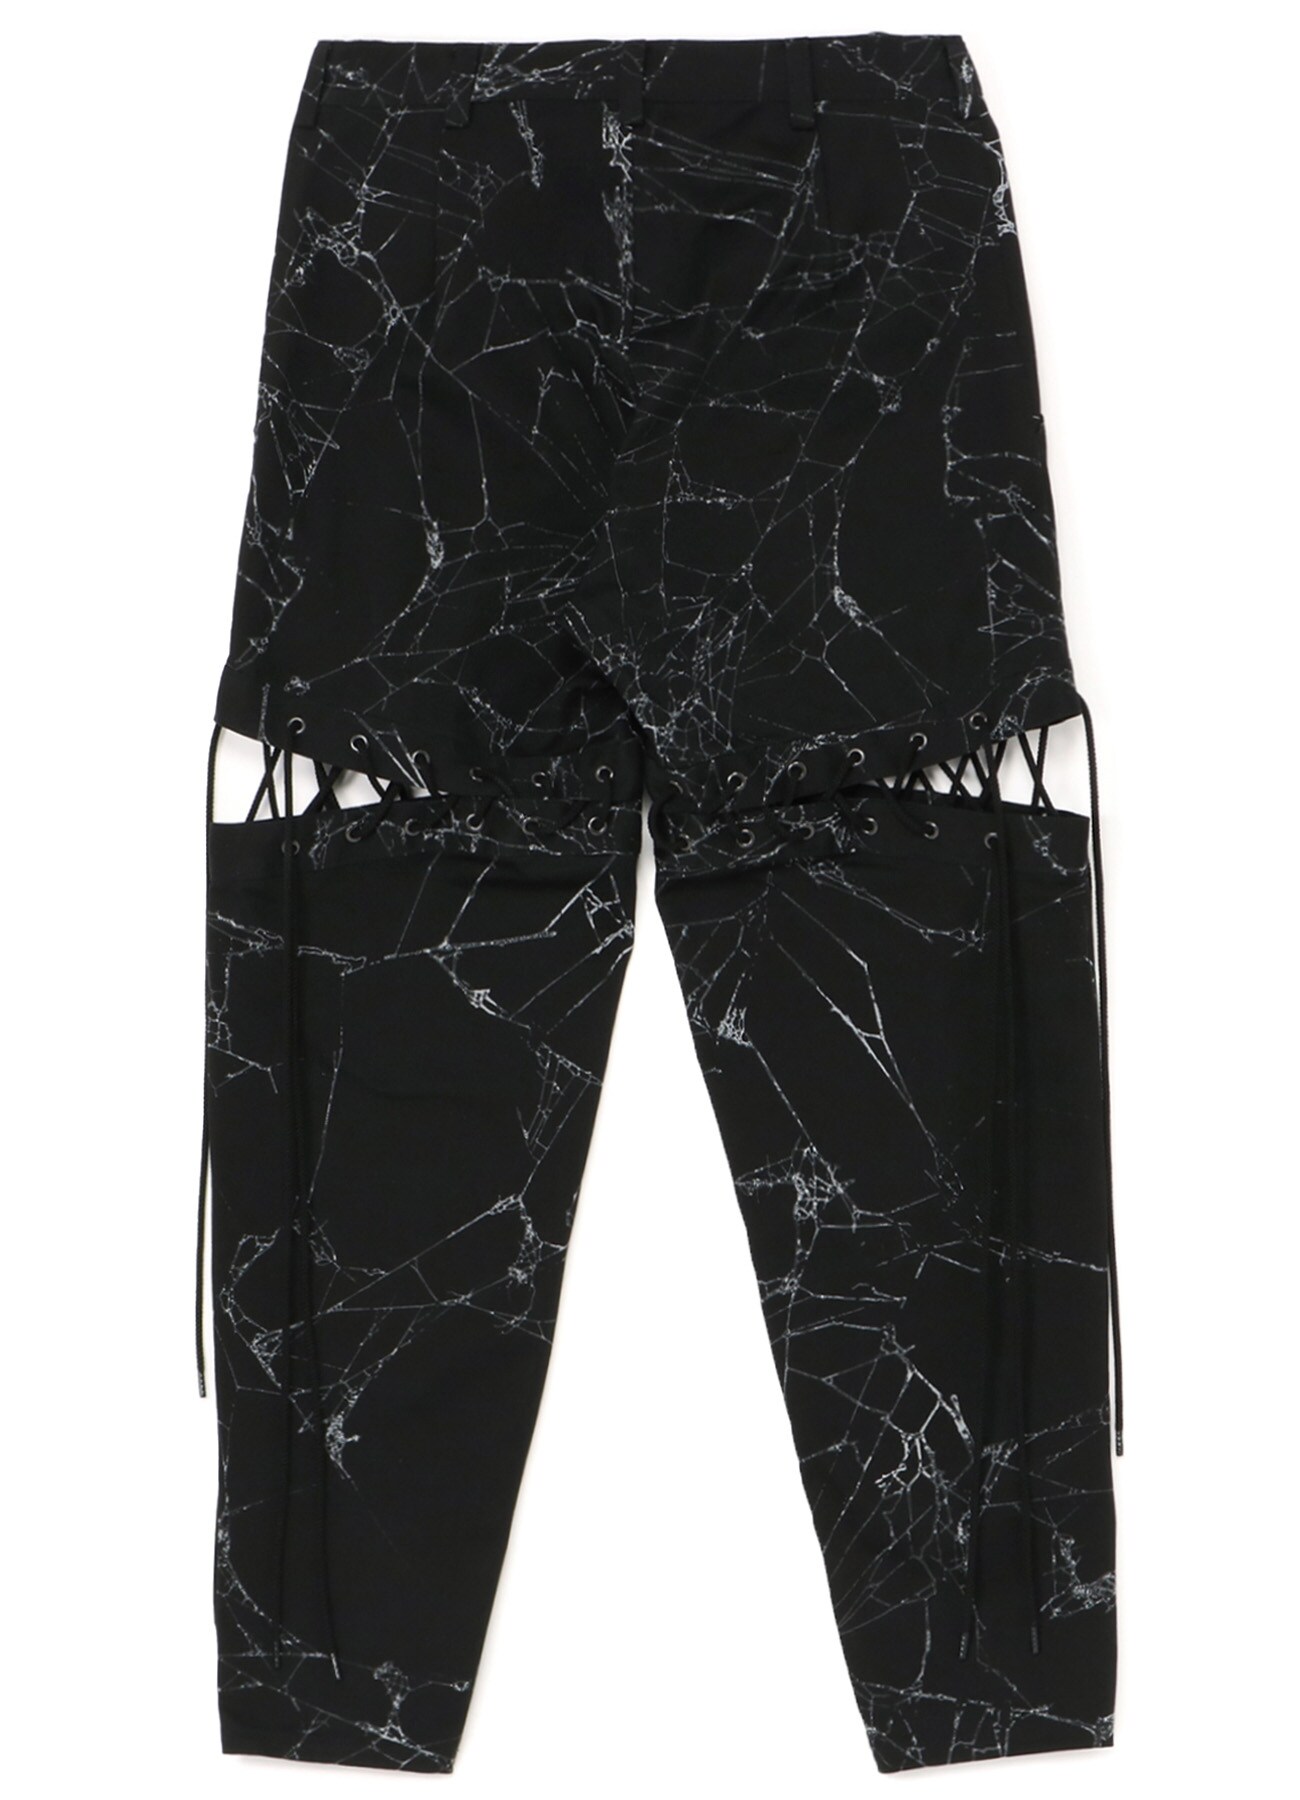 Spider Drill Lace Up Pants